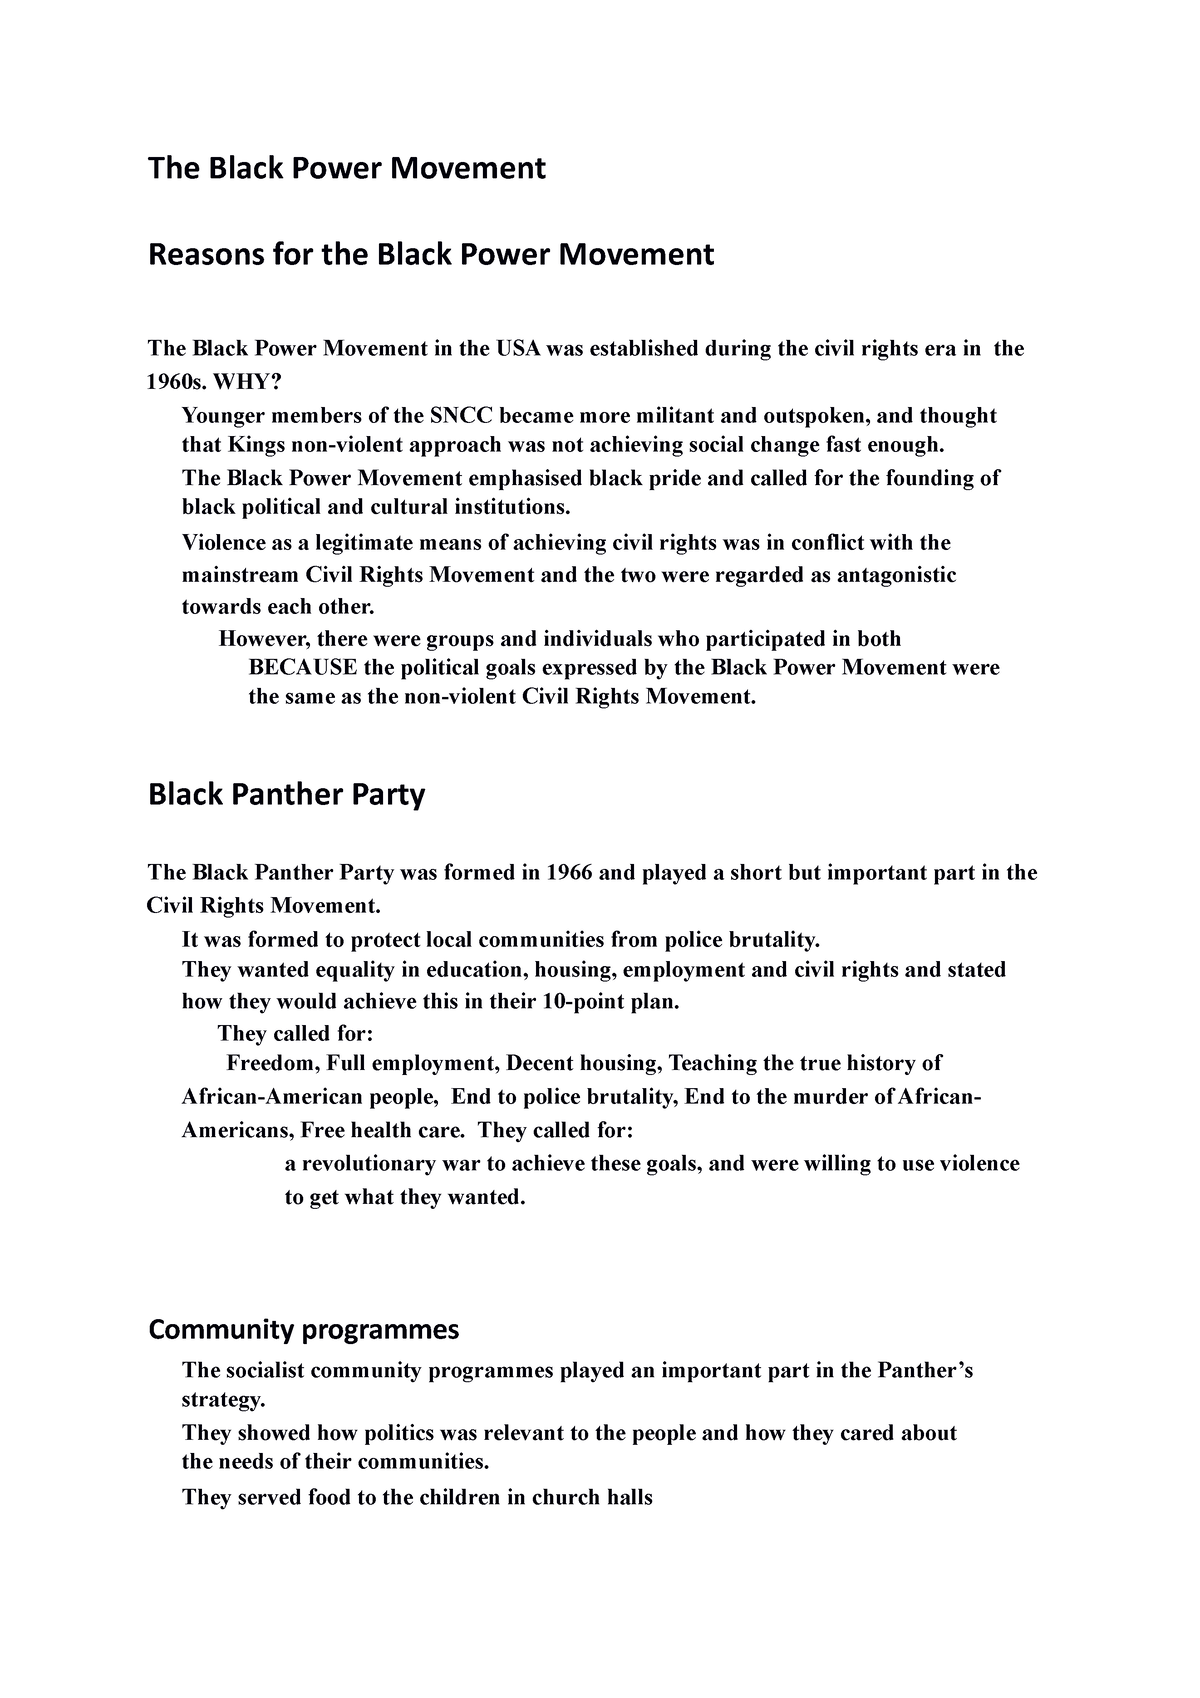 background of the black power movement essay